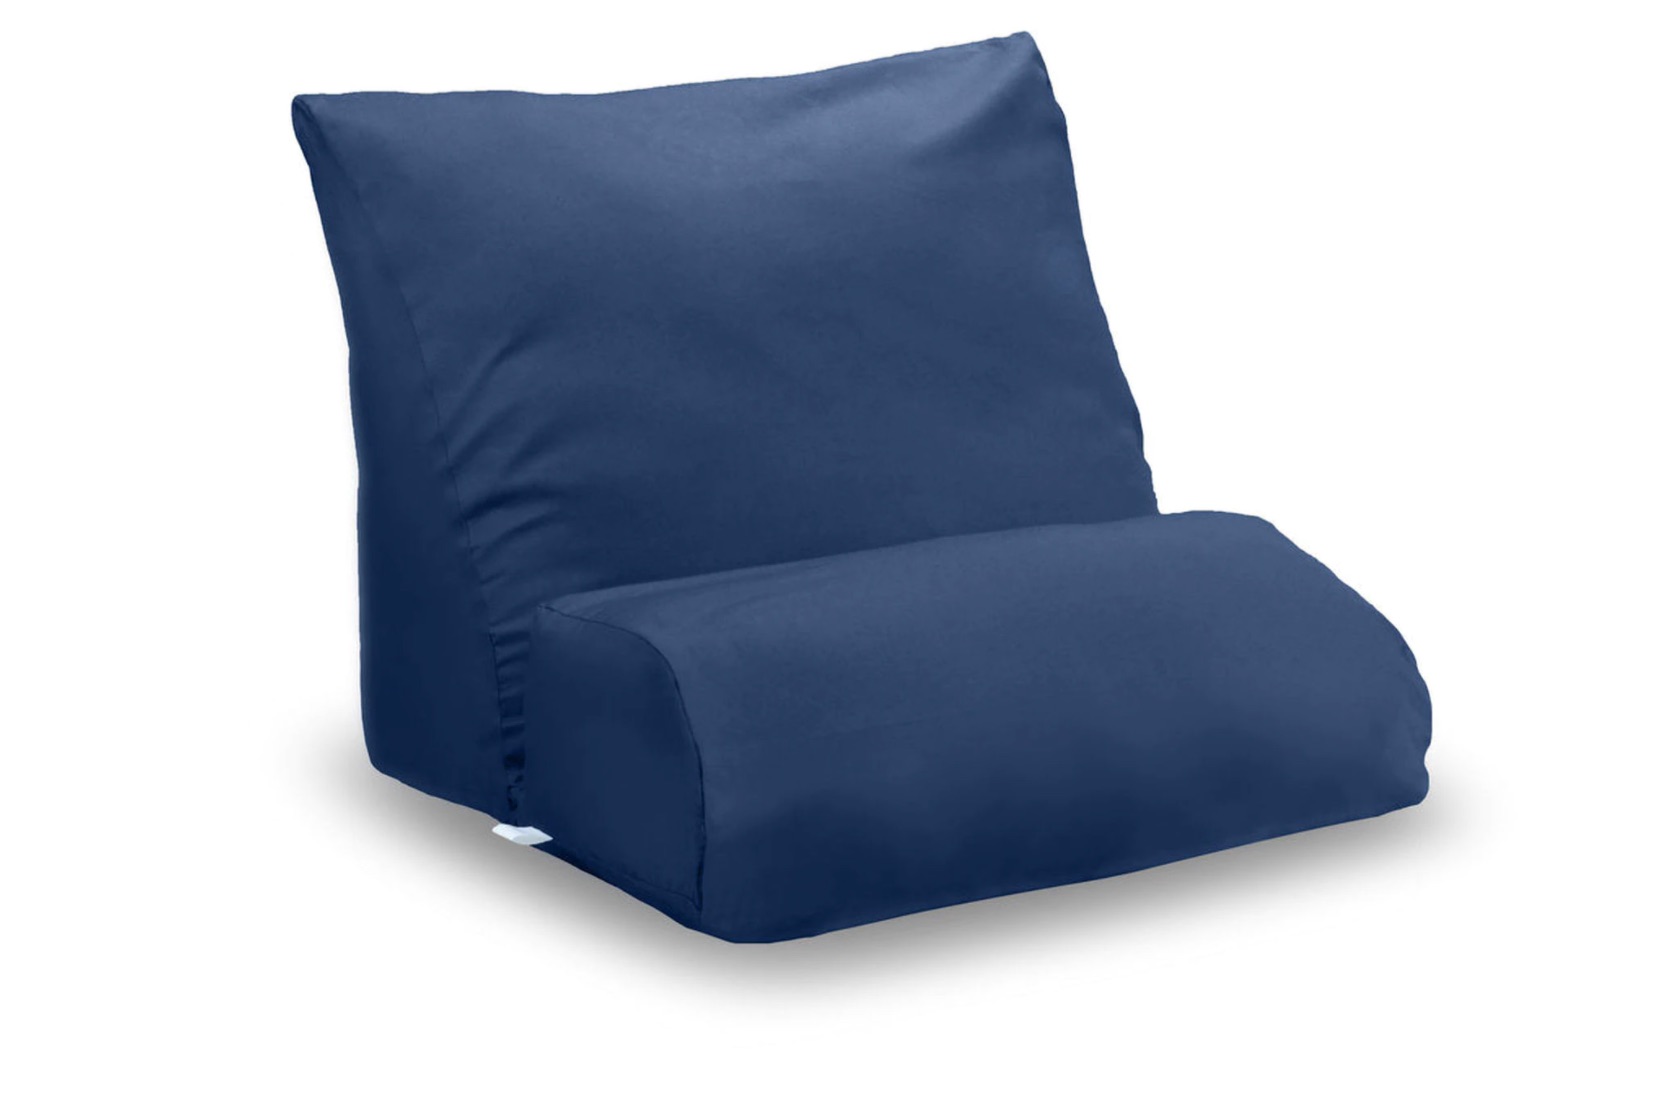 The Best Reading Pillows – Top Picks and Buyer’s Guide (2021)  Tuck Sleep